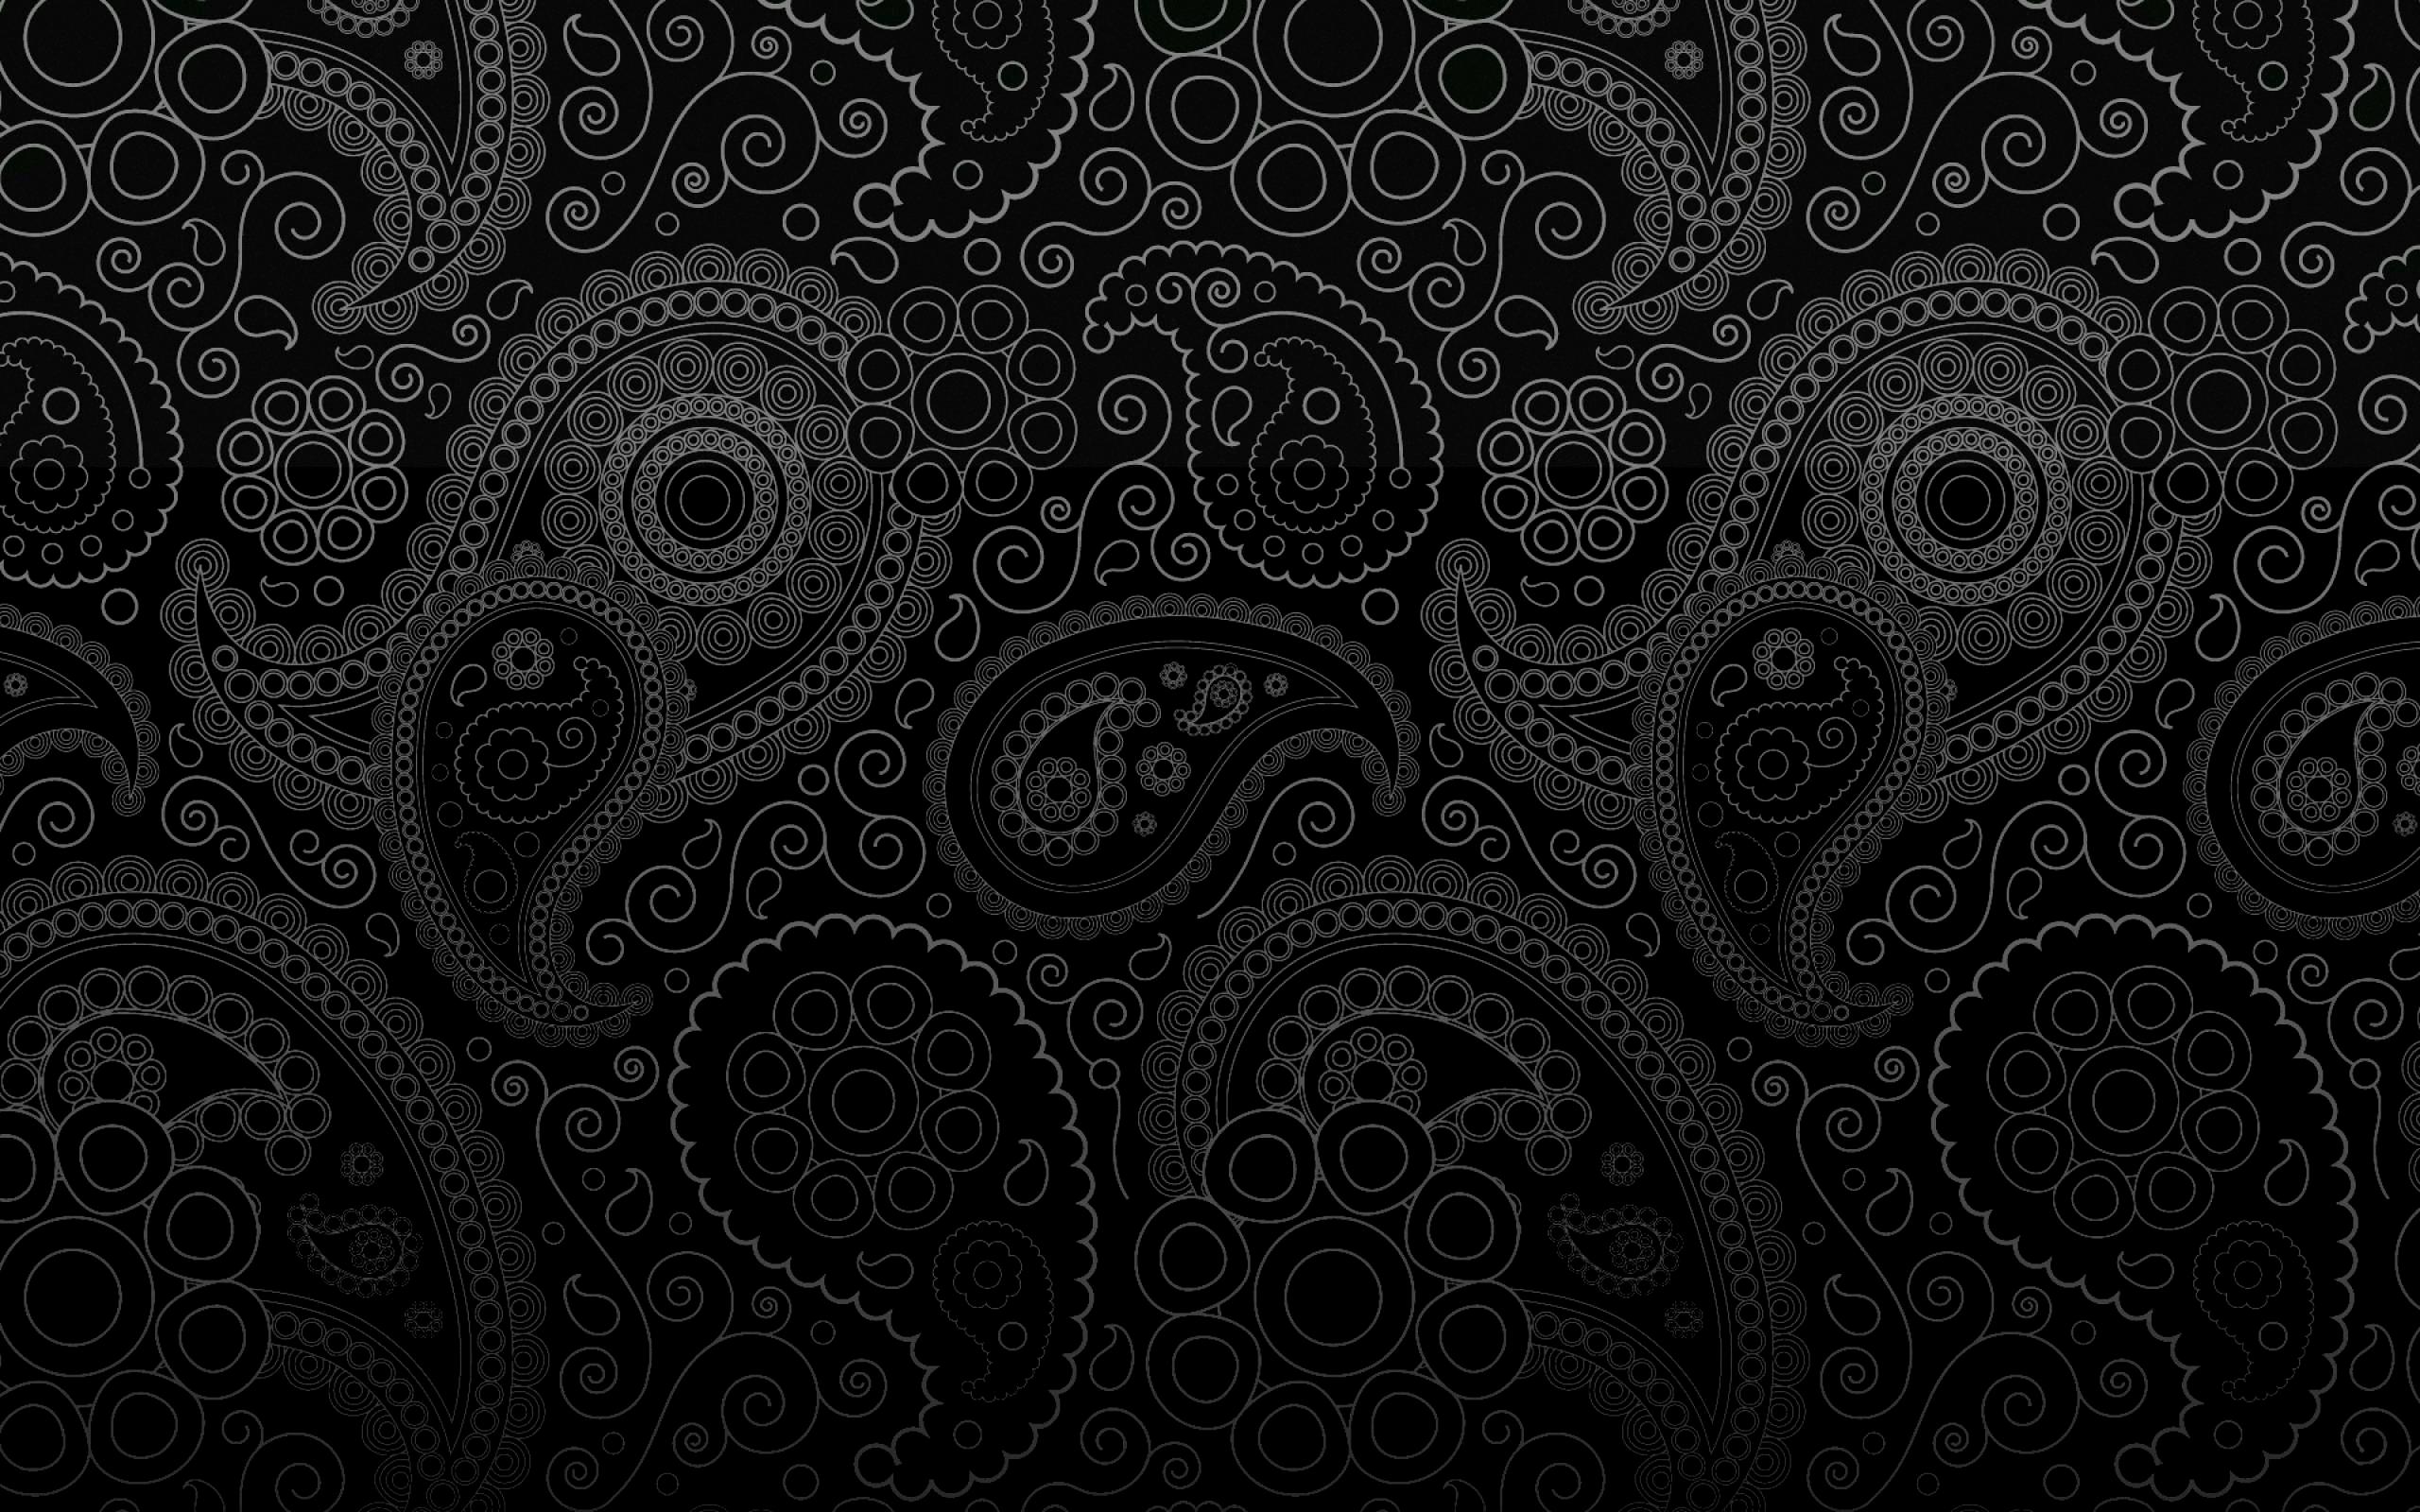 50 Black Wallpaper In FHD For Free Download For Android, Desktop